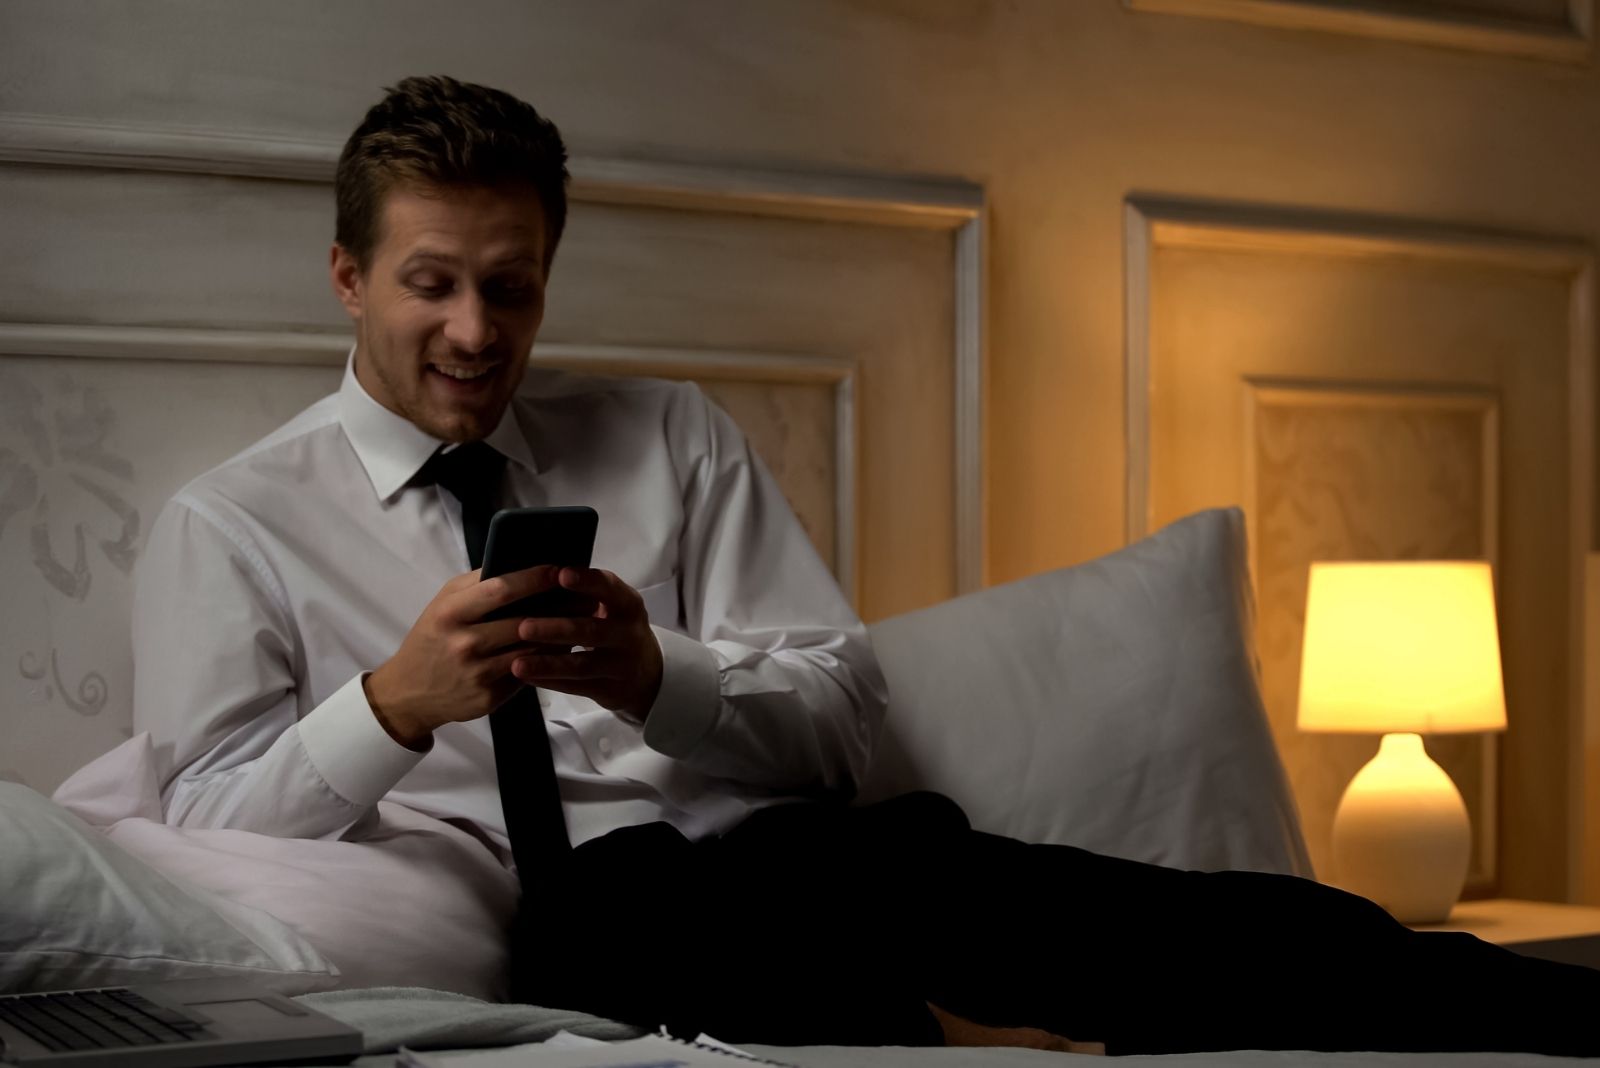 smiling man in suit sitting on bed with dim lights texting dating app